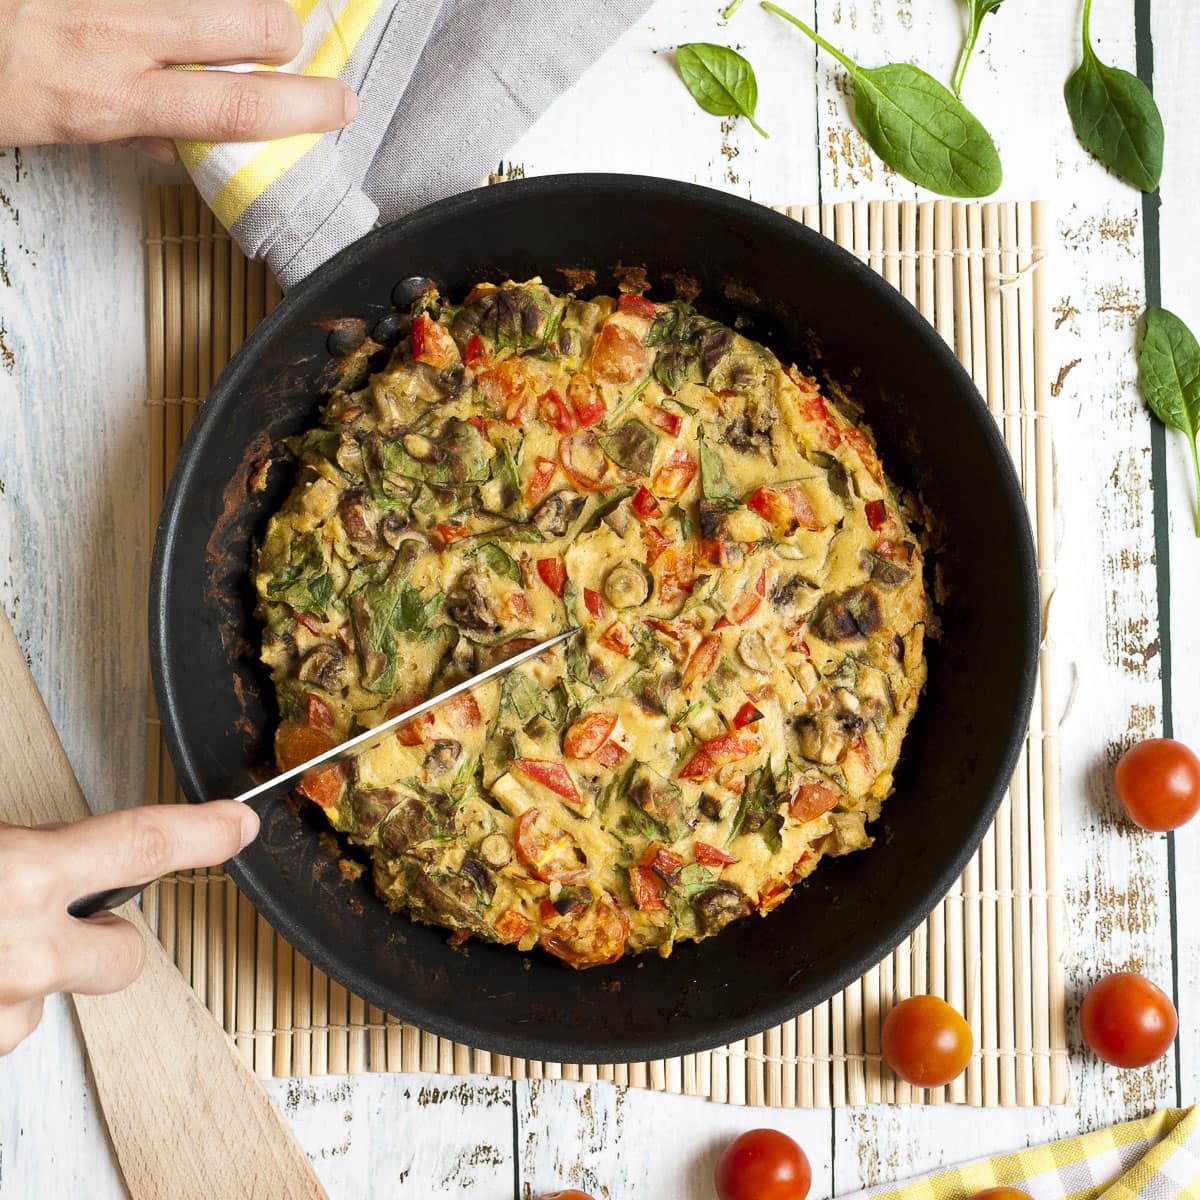 Frying pan from above with a yellow frittata full of veggies like chopped red bell pepper, green spinach leaves, brown mushroom, red tomatoes. A hand is holding a knife and about to slice in it. 